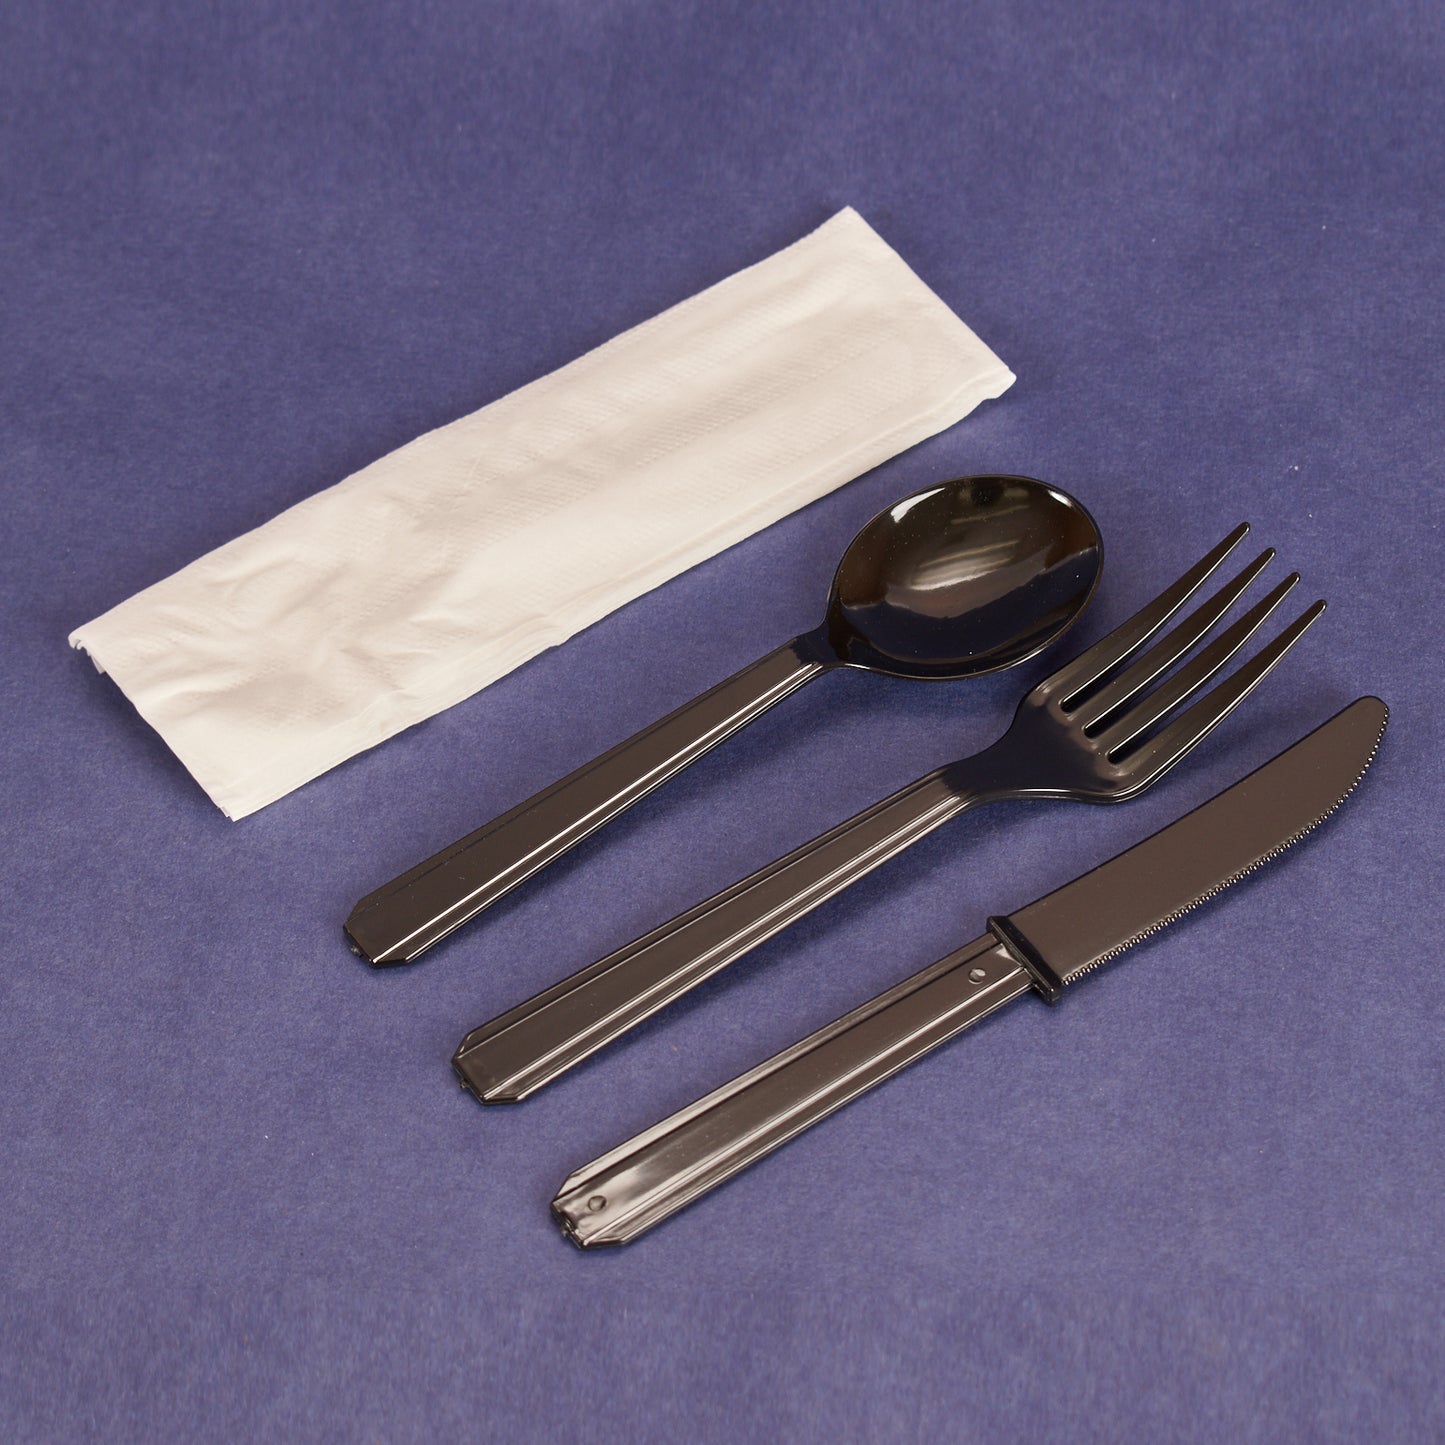 Cutlery Kits, Heavy-Weight Black Plastic Knife, Fork, Soup Spoon, and 1Ply Napkin (250/set)